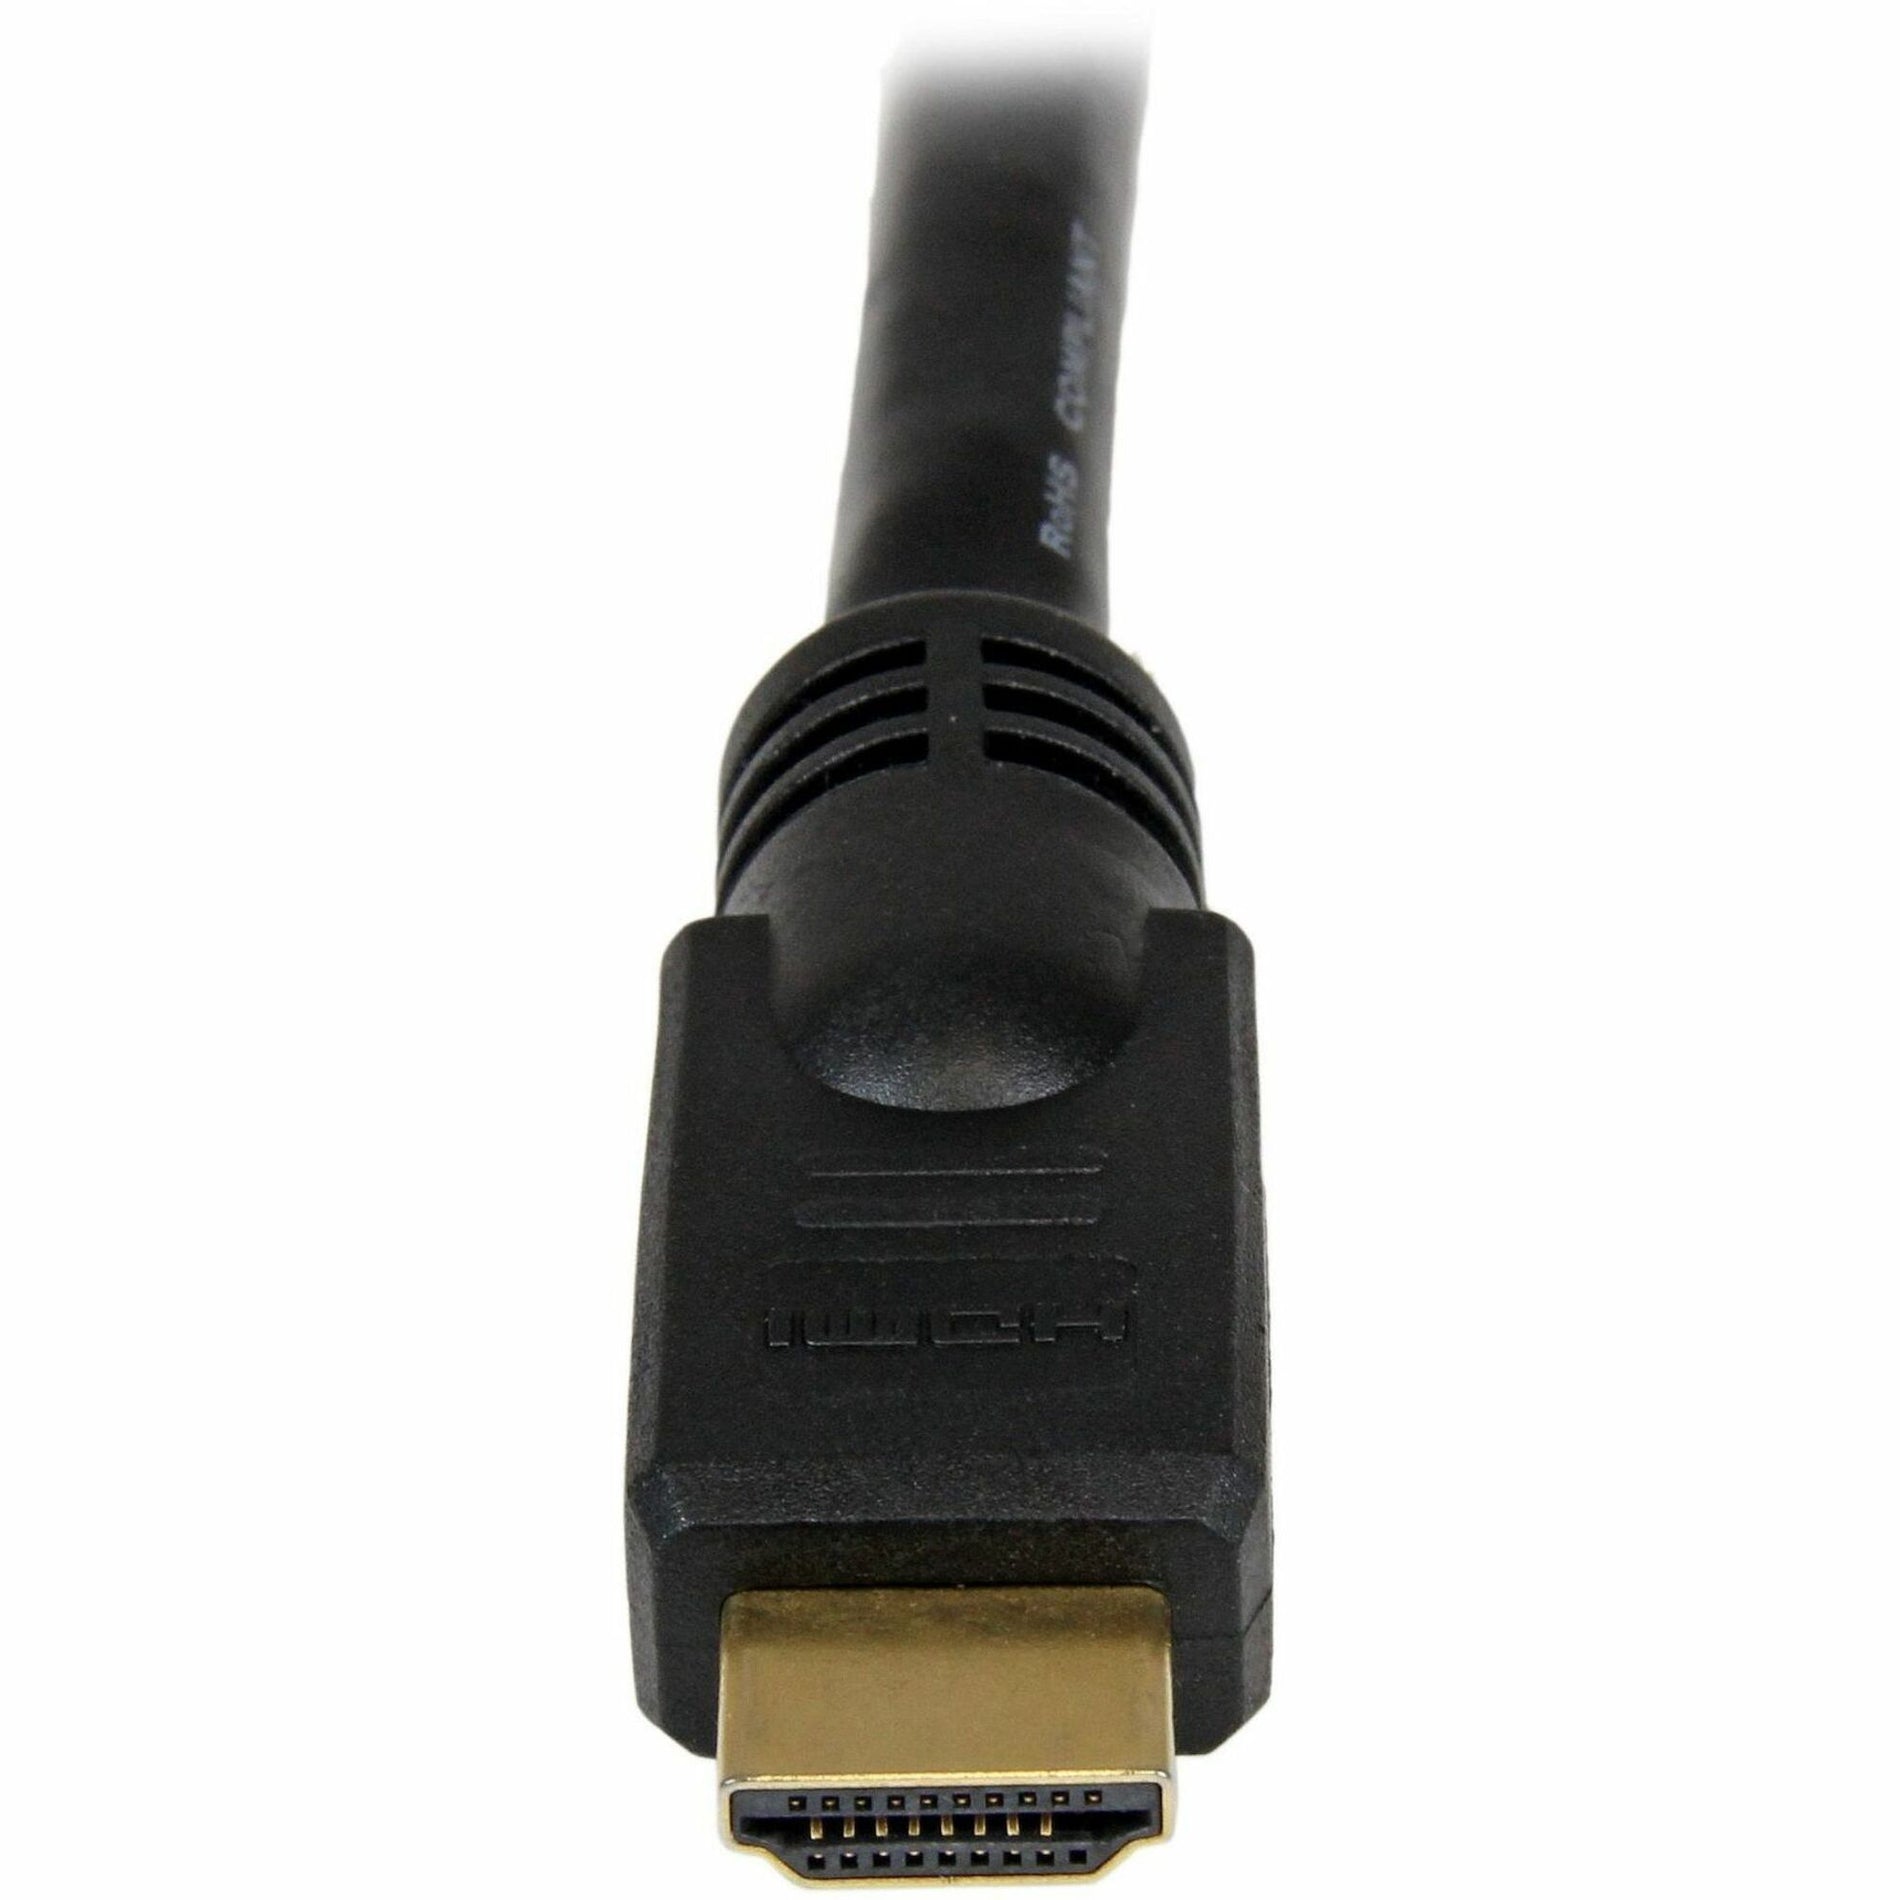 StarTech.com HDMM30 30 ft High Speed HDMI Cable - Ultra HD 4k x 2k HDMI Cable, Strain Relief, Corrosion-free, Molded, Gold Plated Connectors, Black